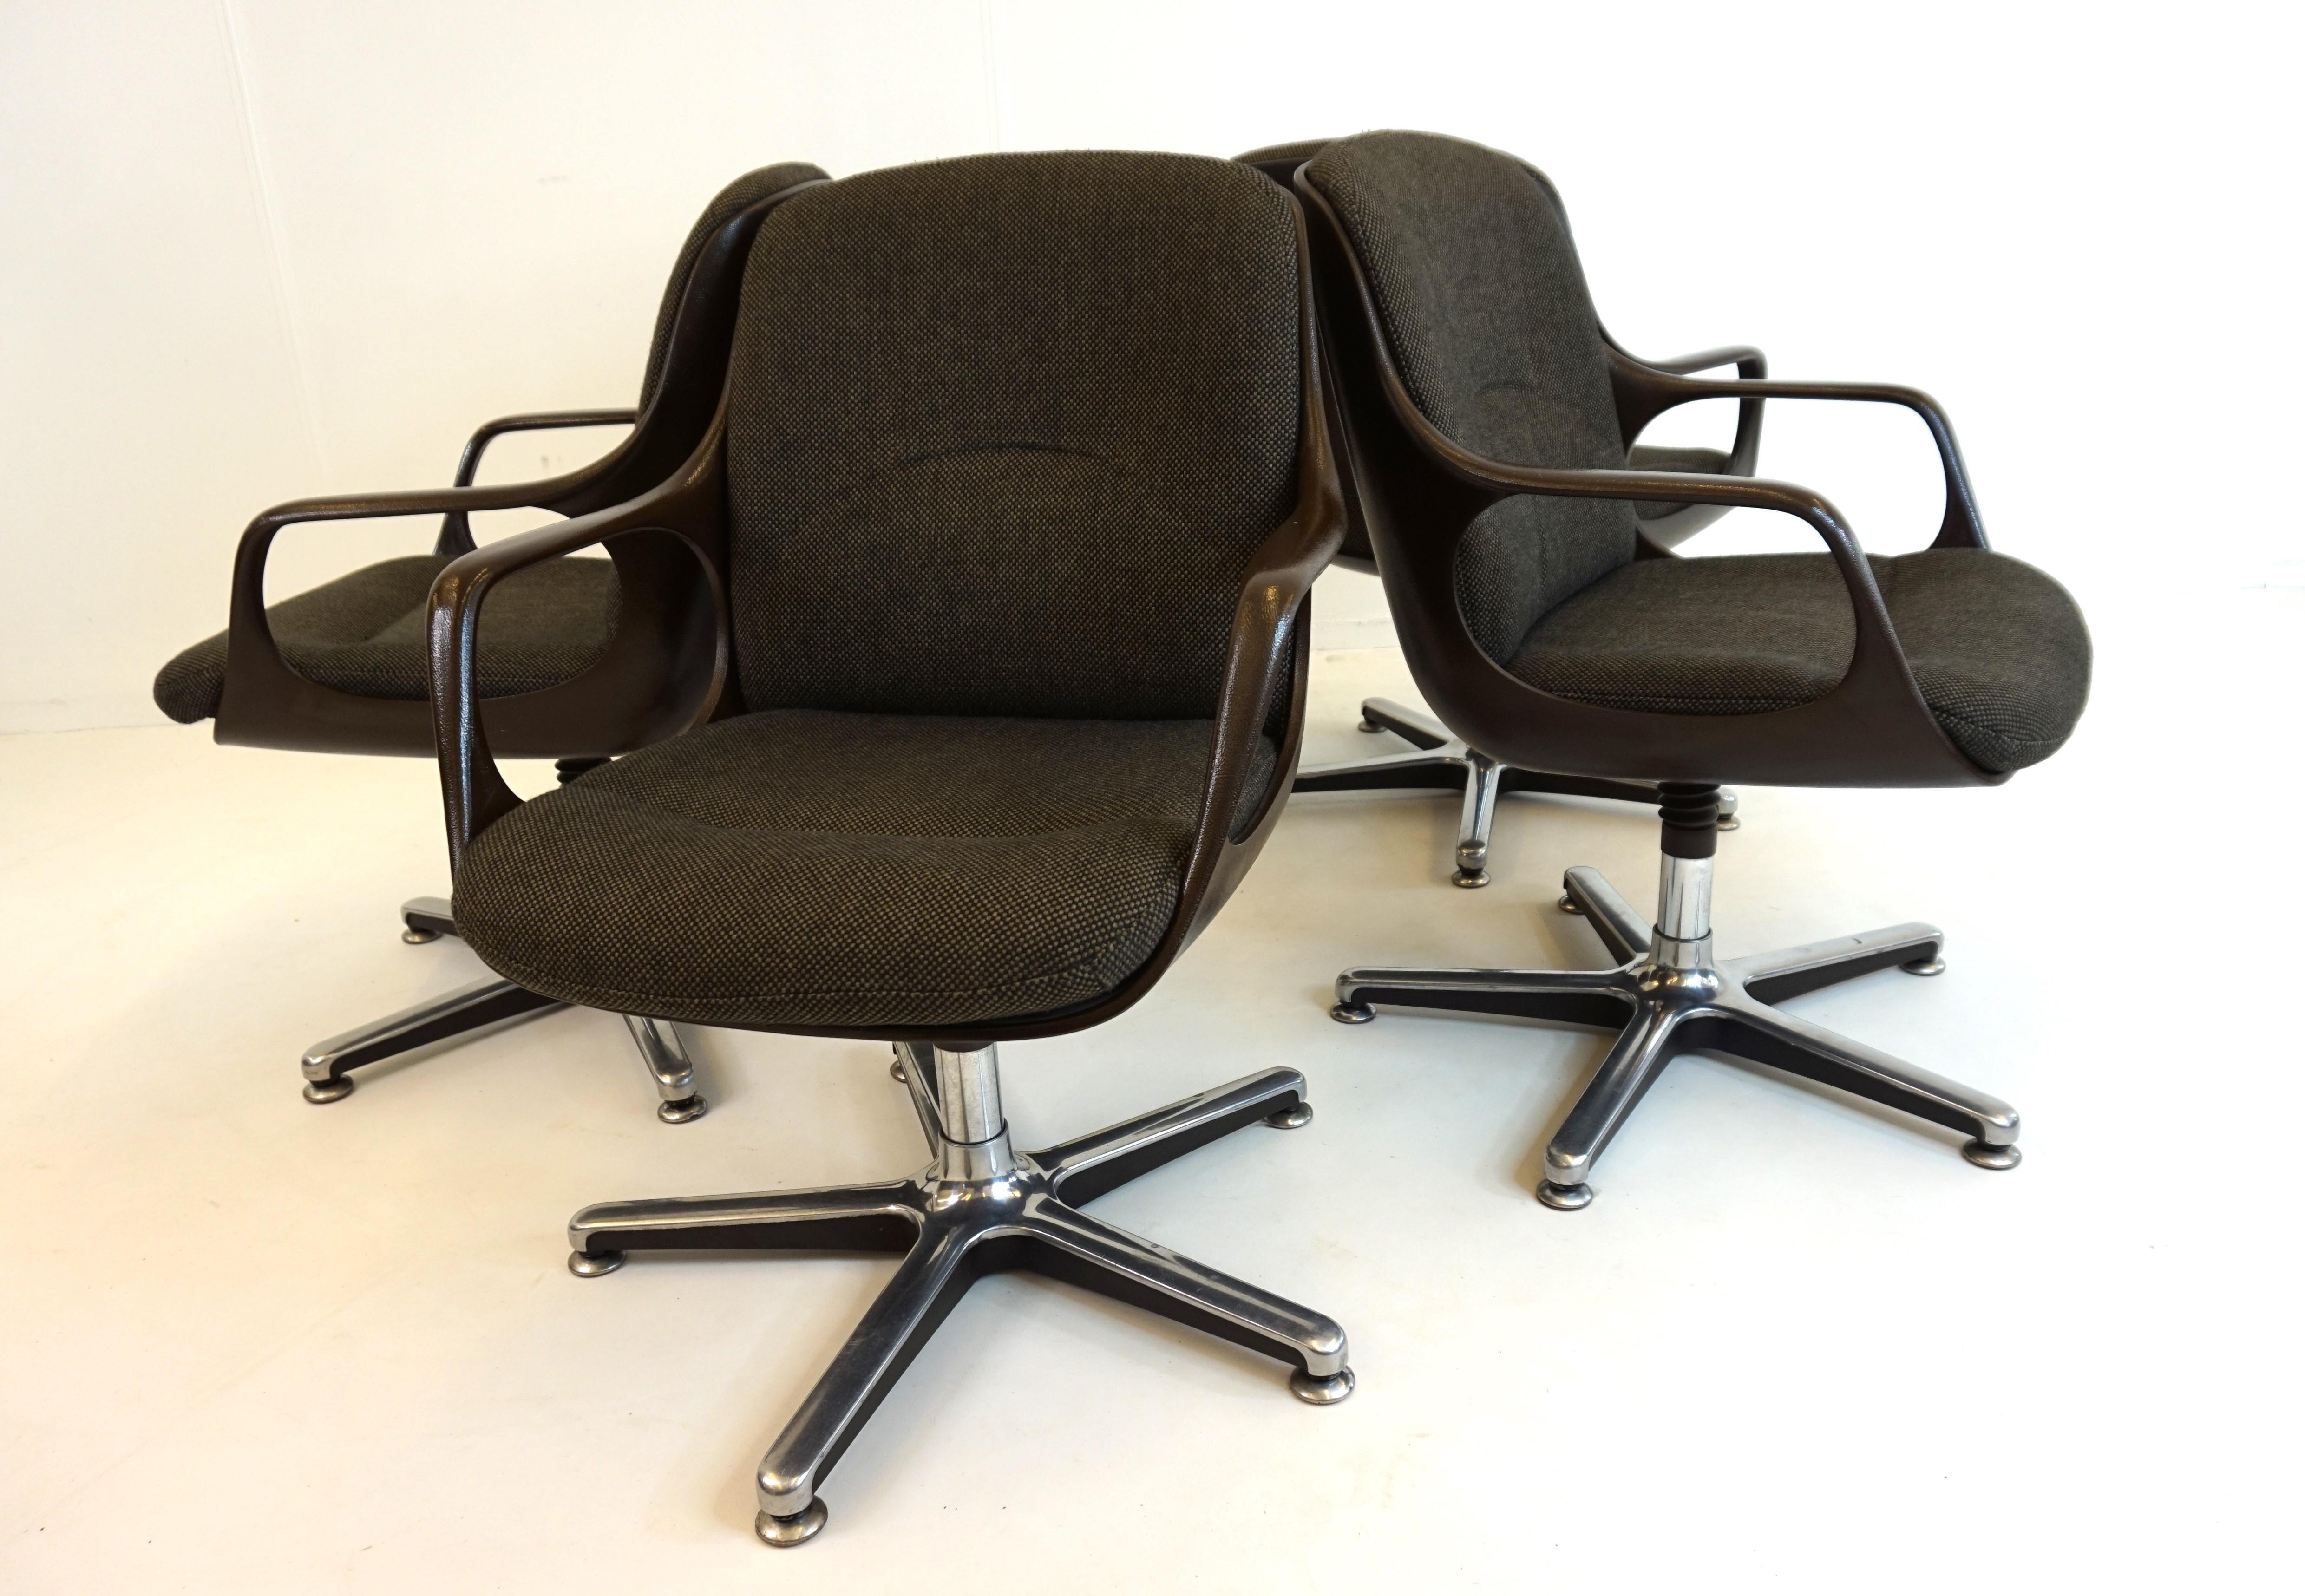 Chromcraft Set of 5 Space Age Office/Dining Room Chairs 4